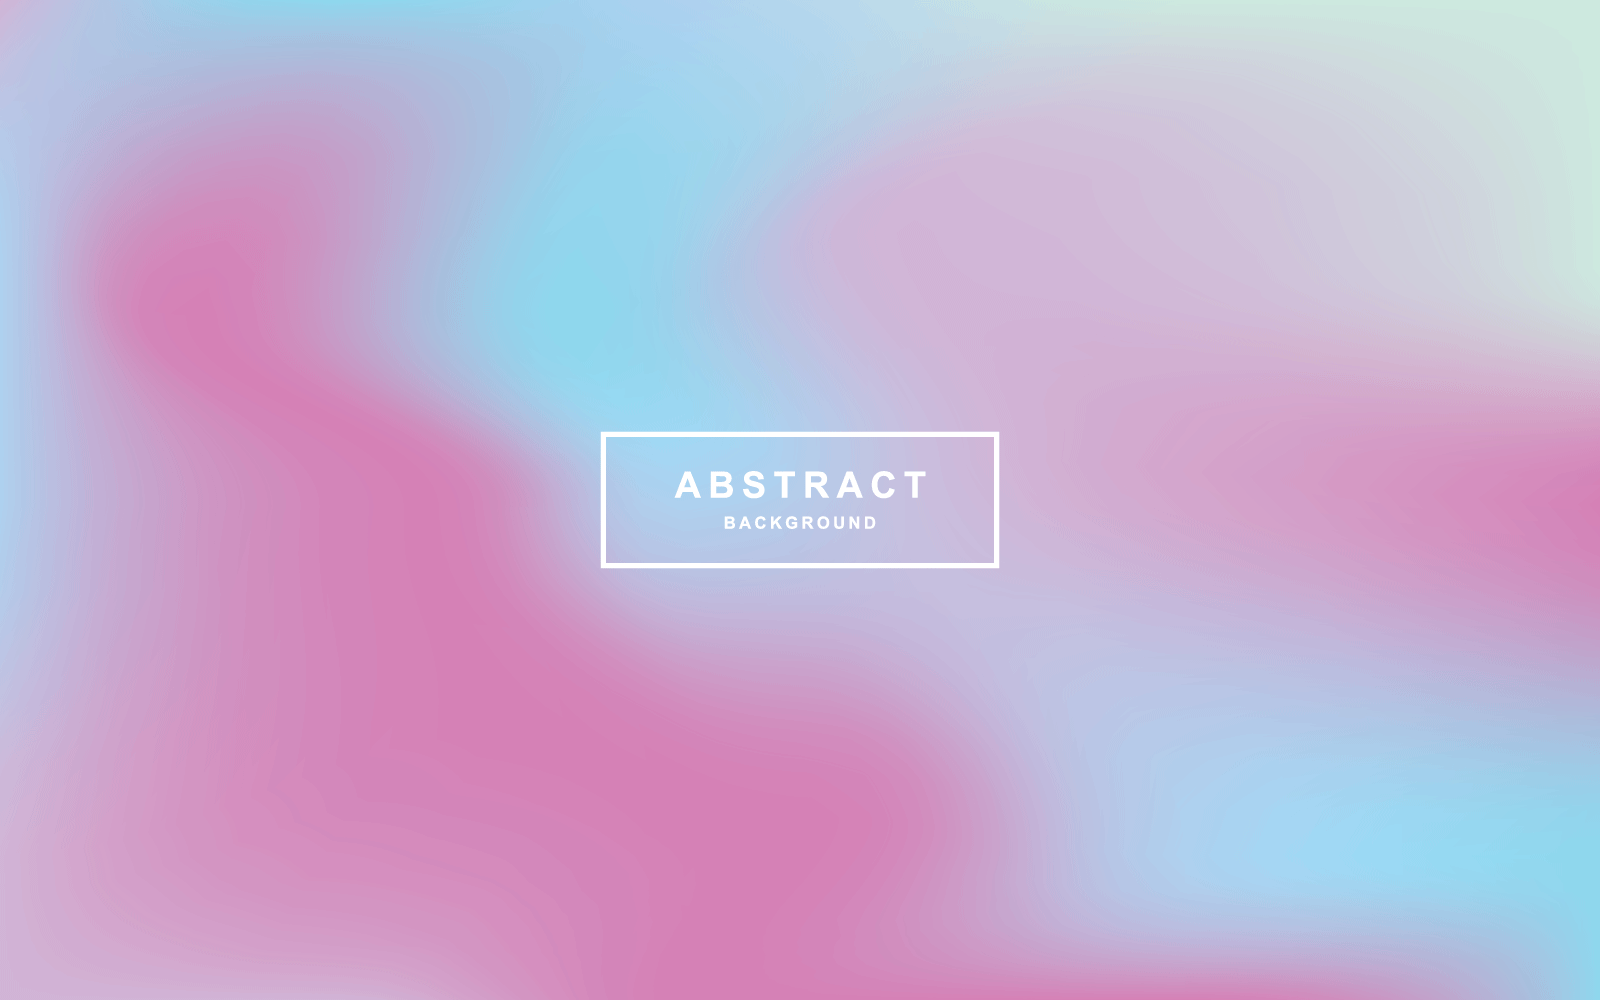 Abstract blurred gradient background template